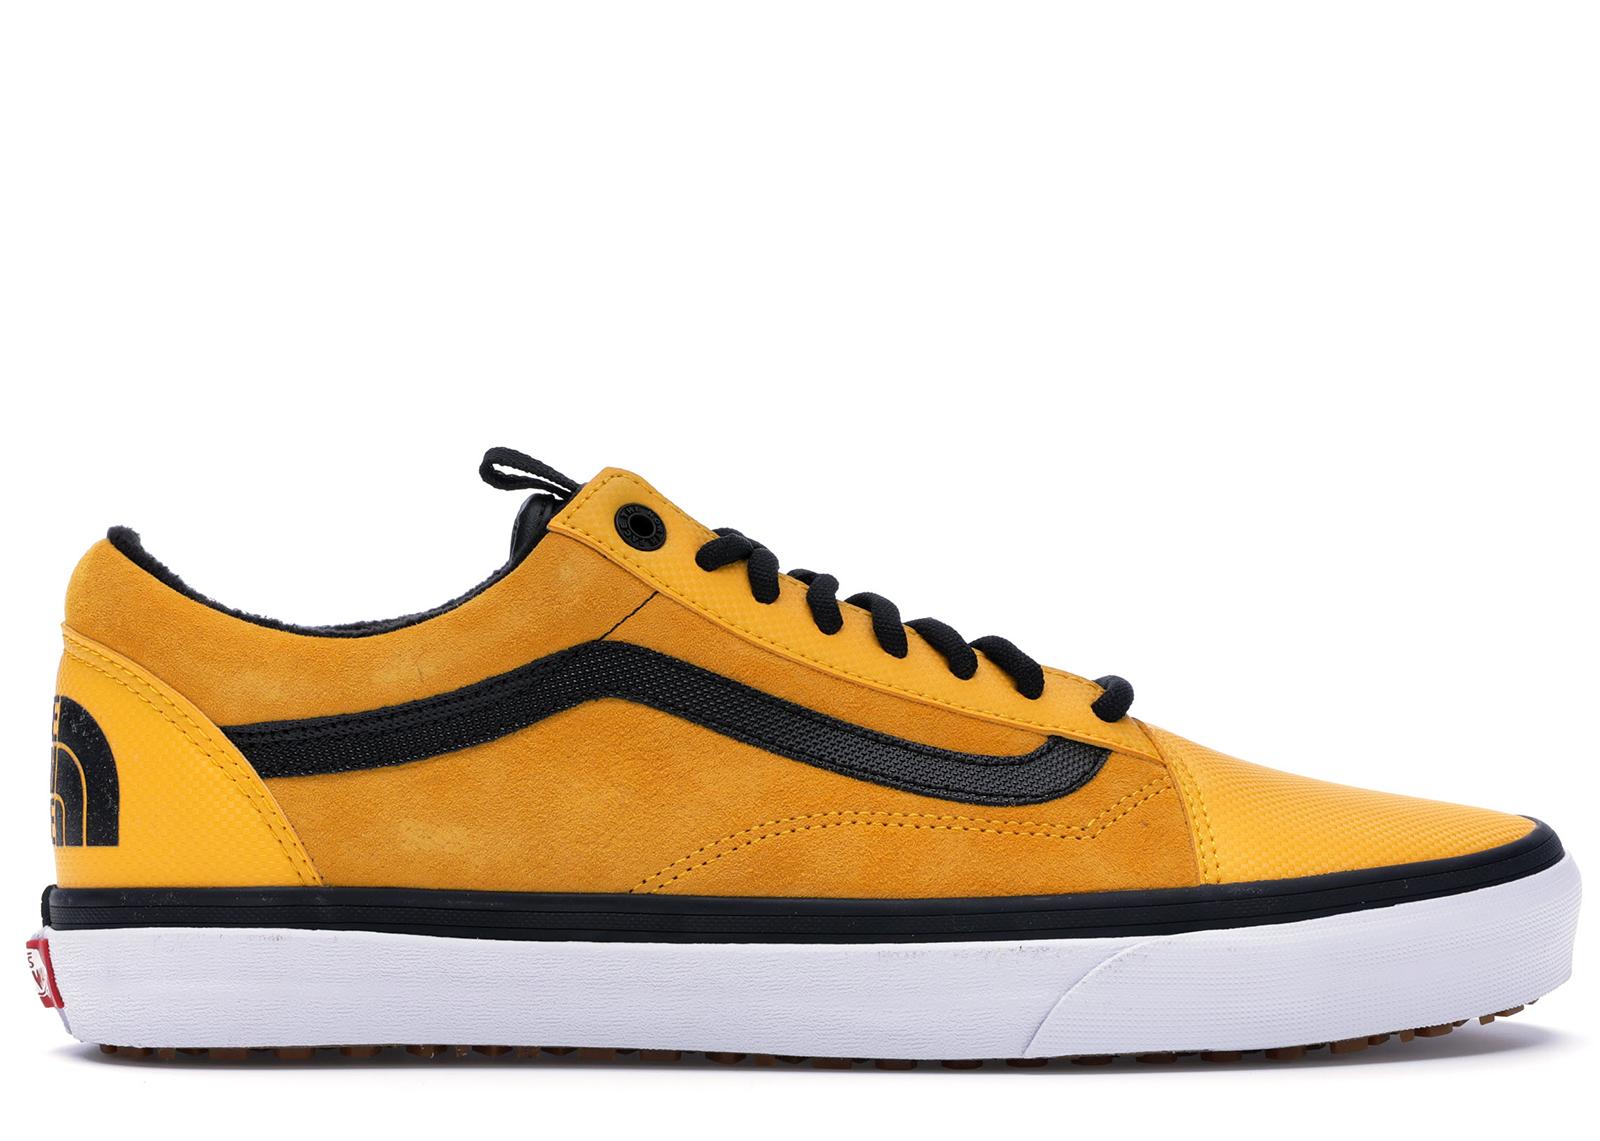 vans north face yellow shoes